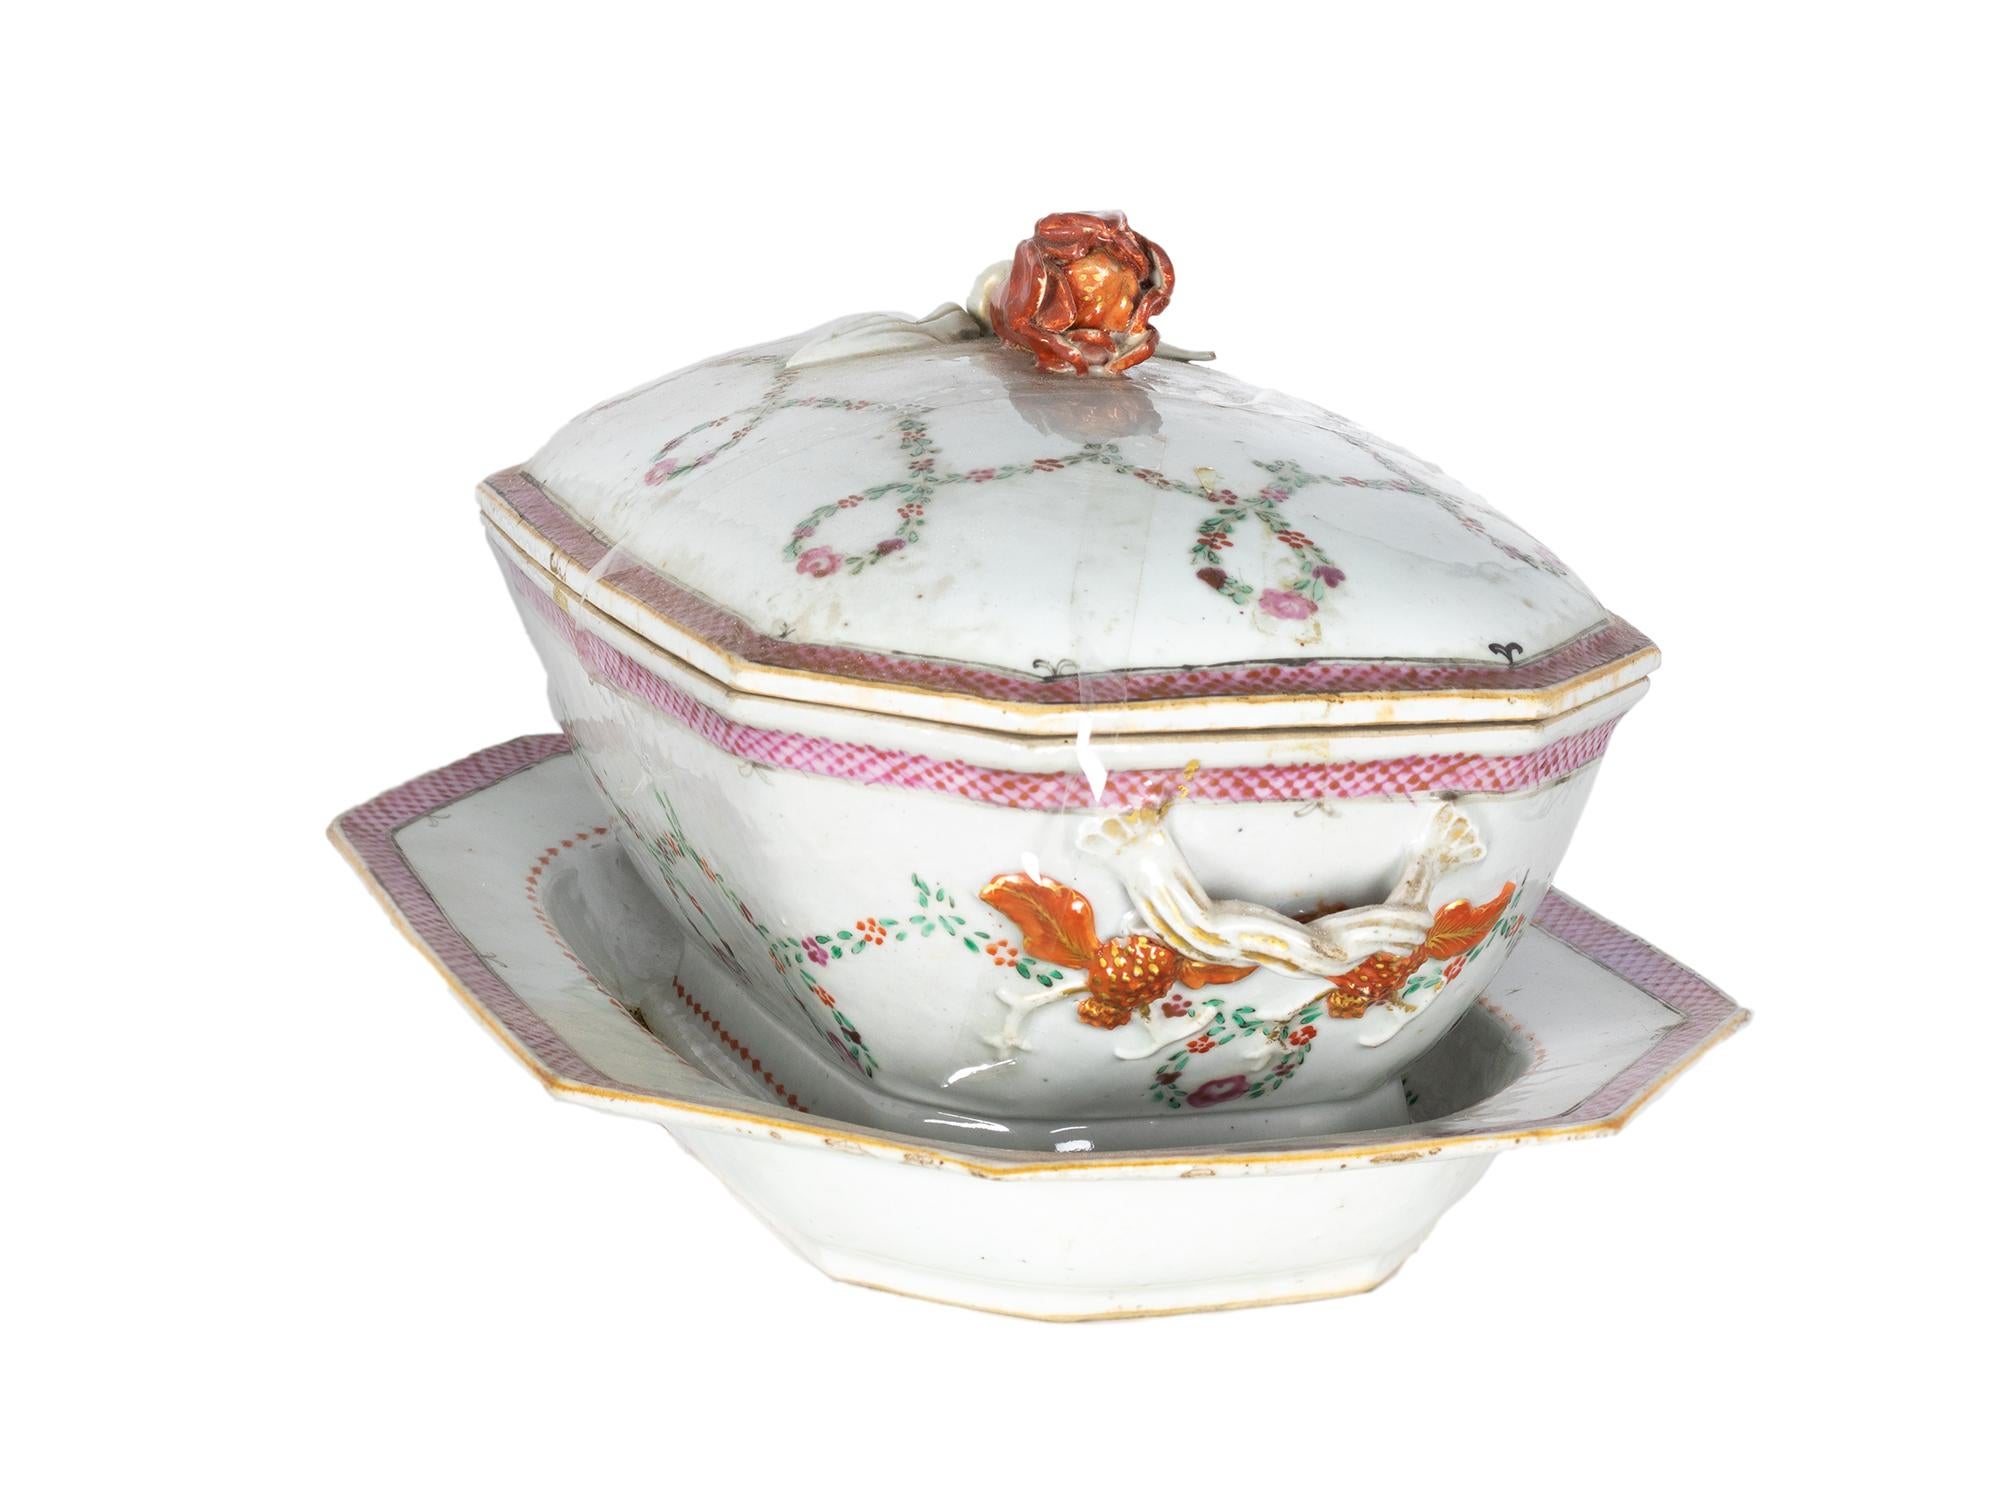 Tureen and octave porcelain platter decorated with snakeskin-style border of the Portuguese India Company of the Rose Family in white porcelain, red and pink details, floral motif and central handle in the shape of a red bell. Pieces from the reign